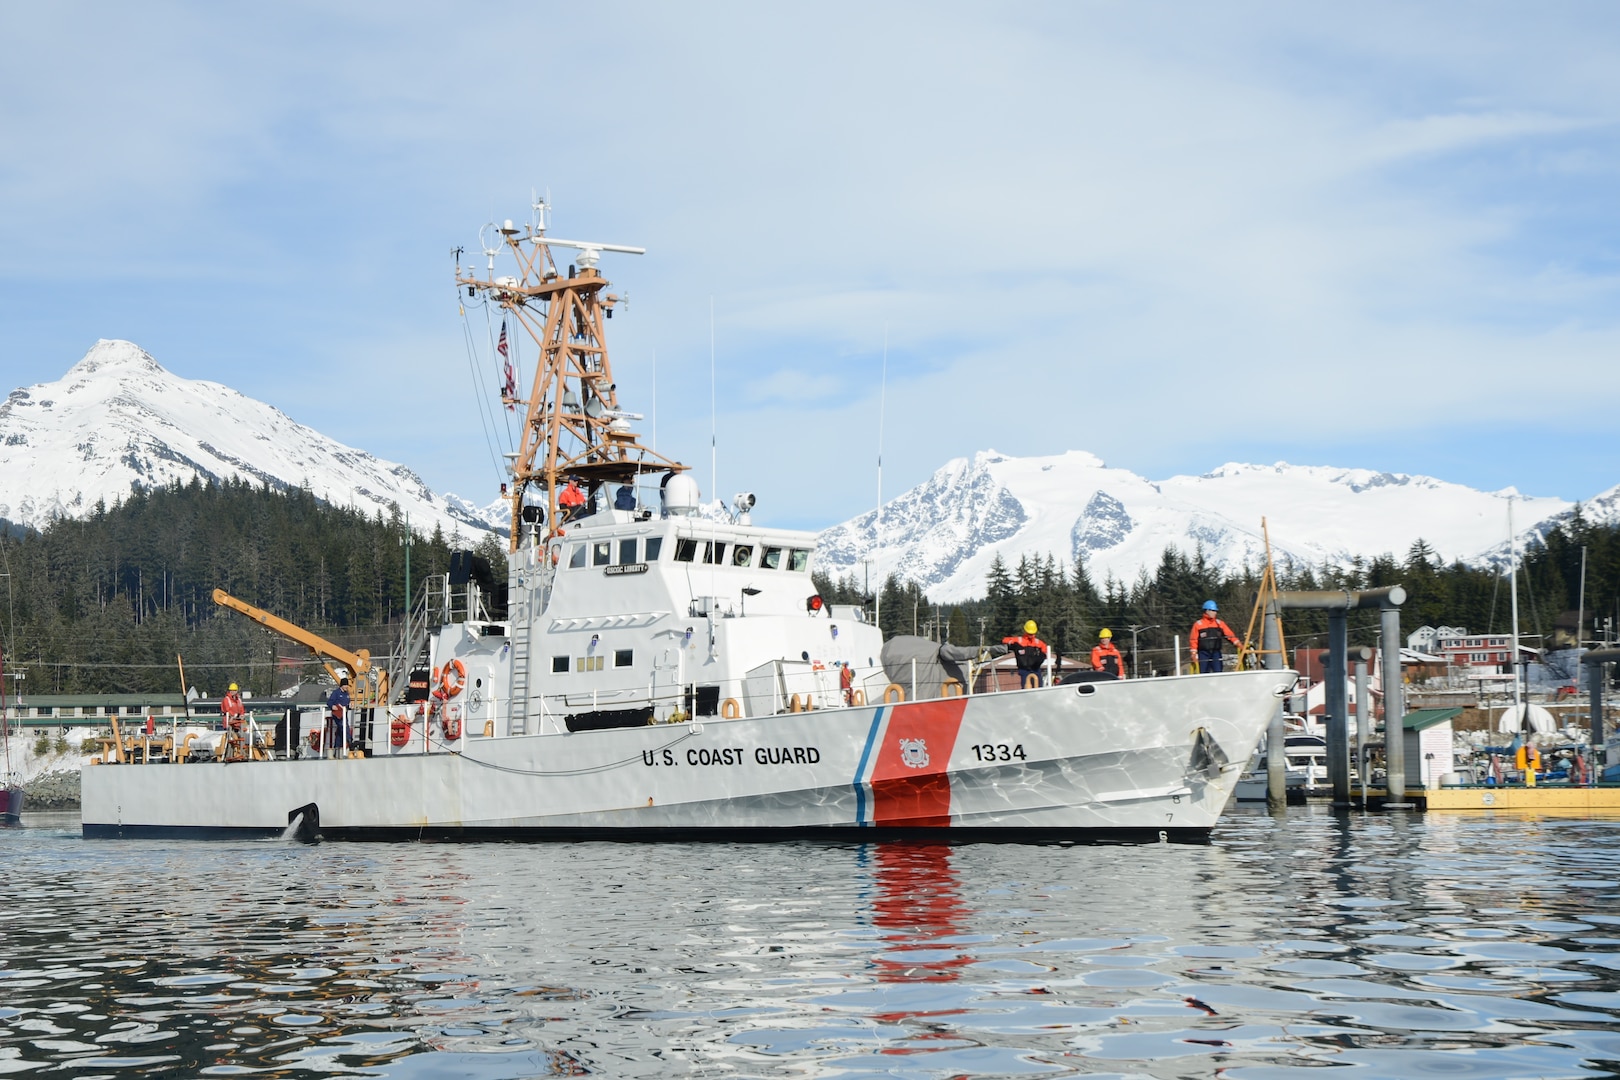 The crew of the Coast Guard Cutter Liberty prepares to moor at their homeport of Juneau, Alaska, March 13, 2018. The crew of the Cutter Liberty, a 110-foot patrol boat homeported in Juneau, Alaska, was completing tailored ship's training availability, a biennial readiness assessment of the cutter and crew.